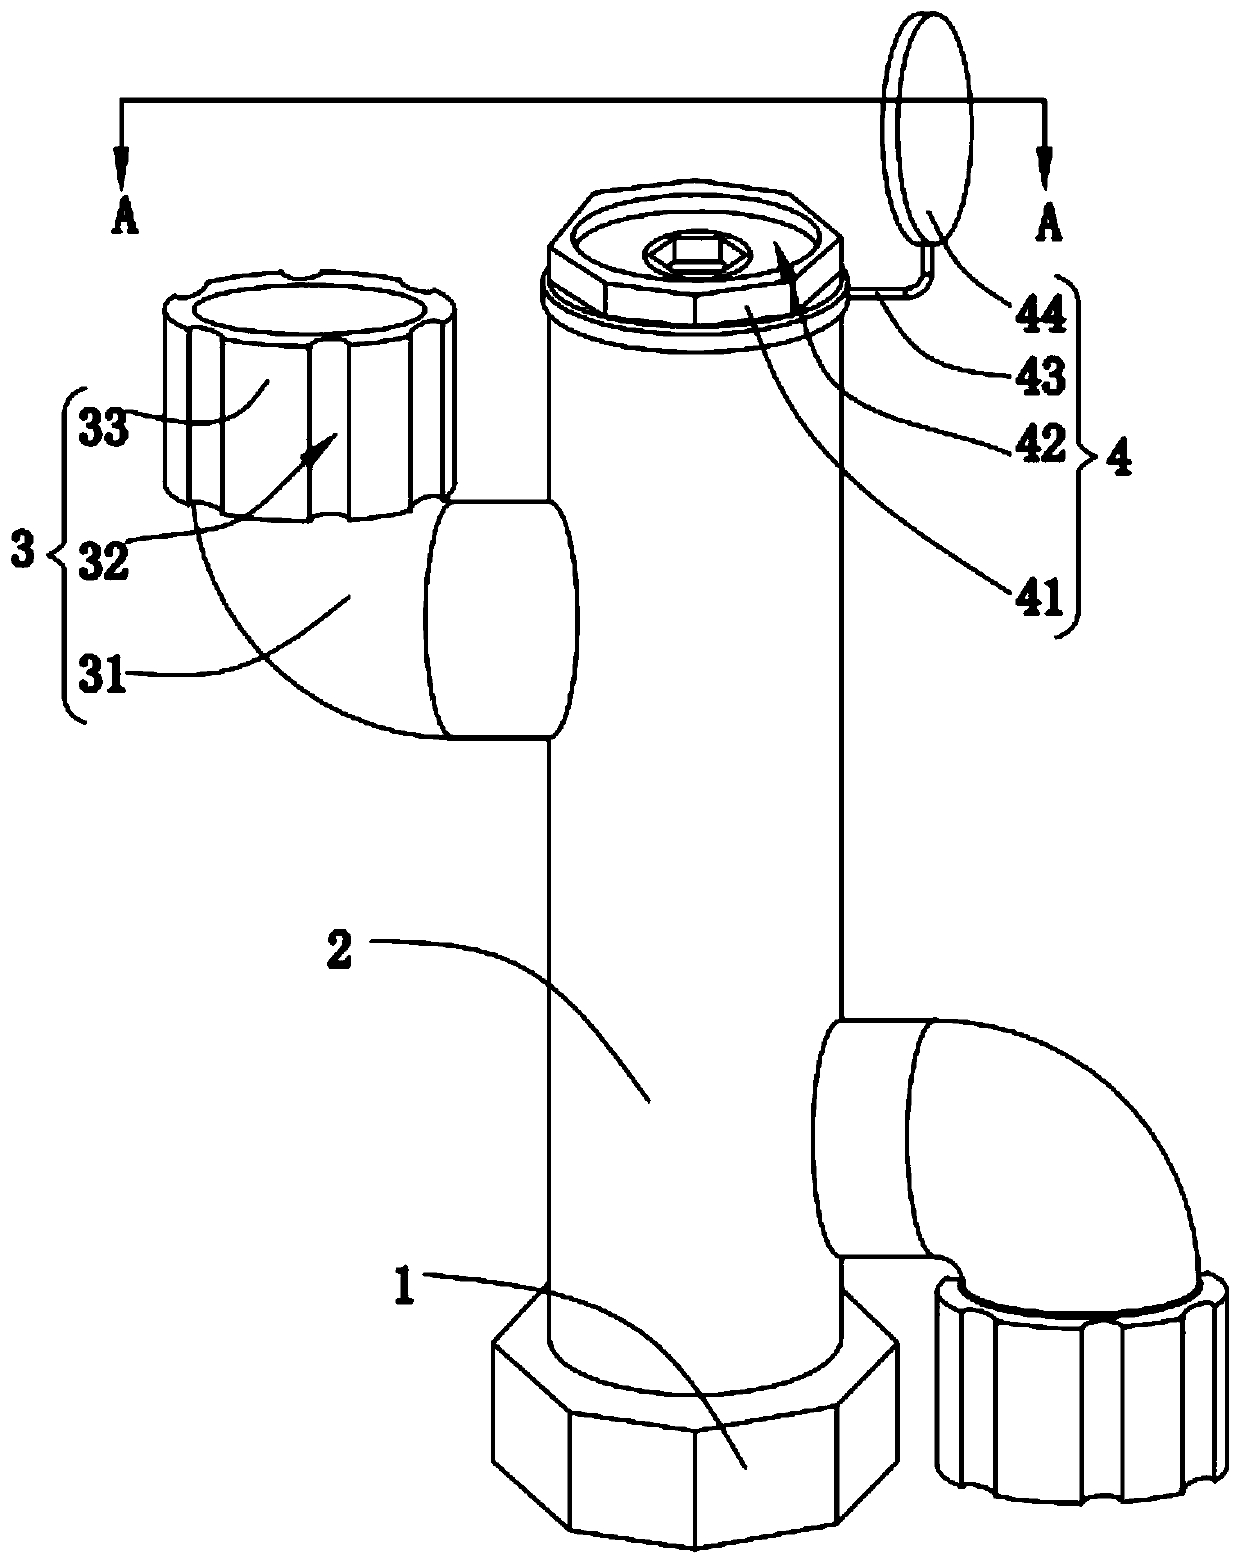 Thermal pipeline filtering device